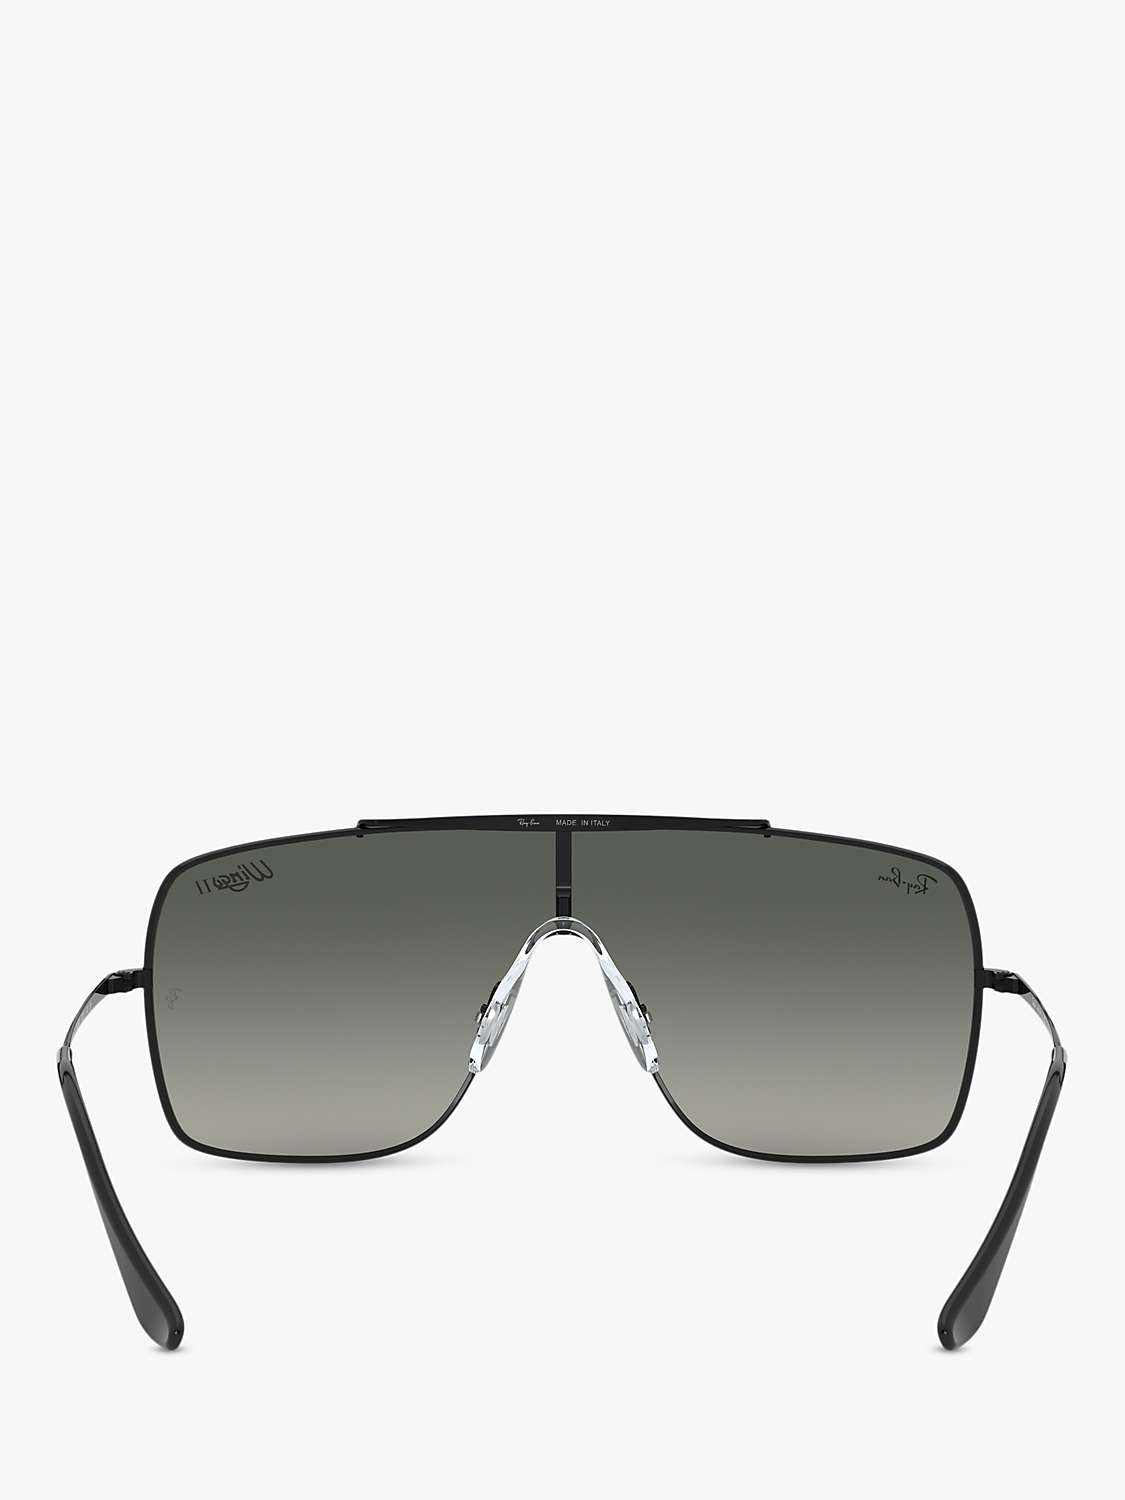 Buy Ray-Ban RB3697 Men's Square Sunglasses Online at johnlewis.com